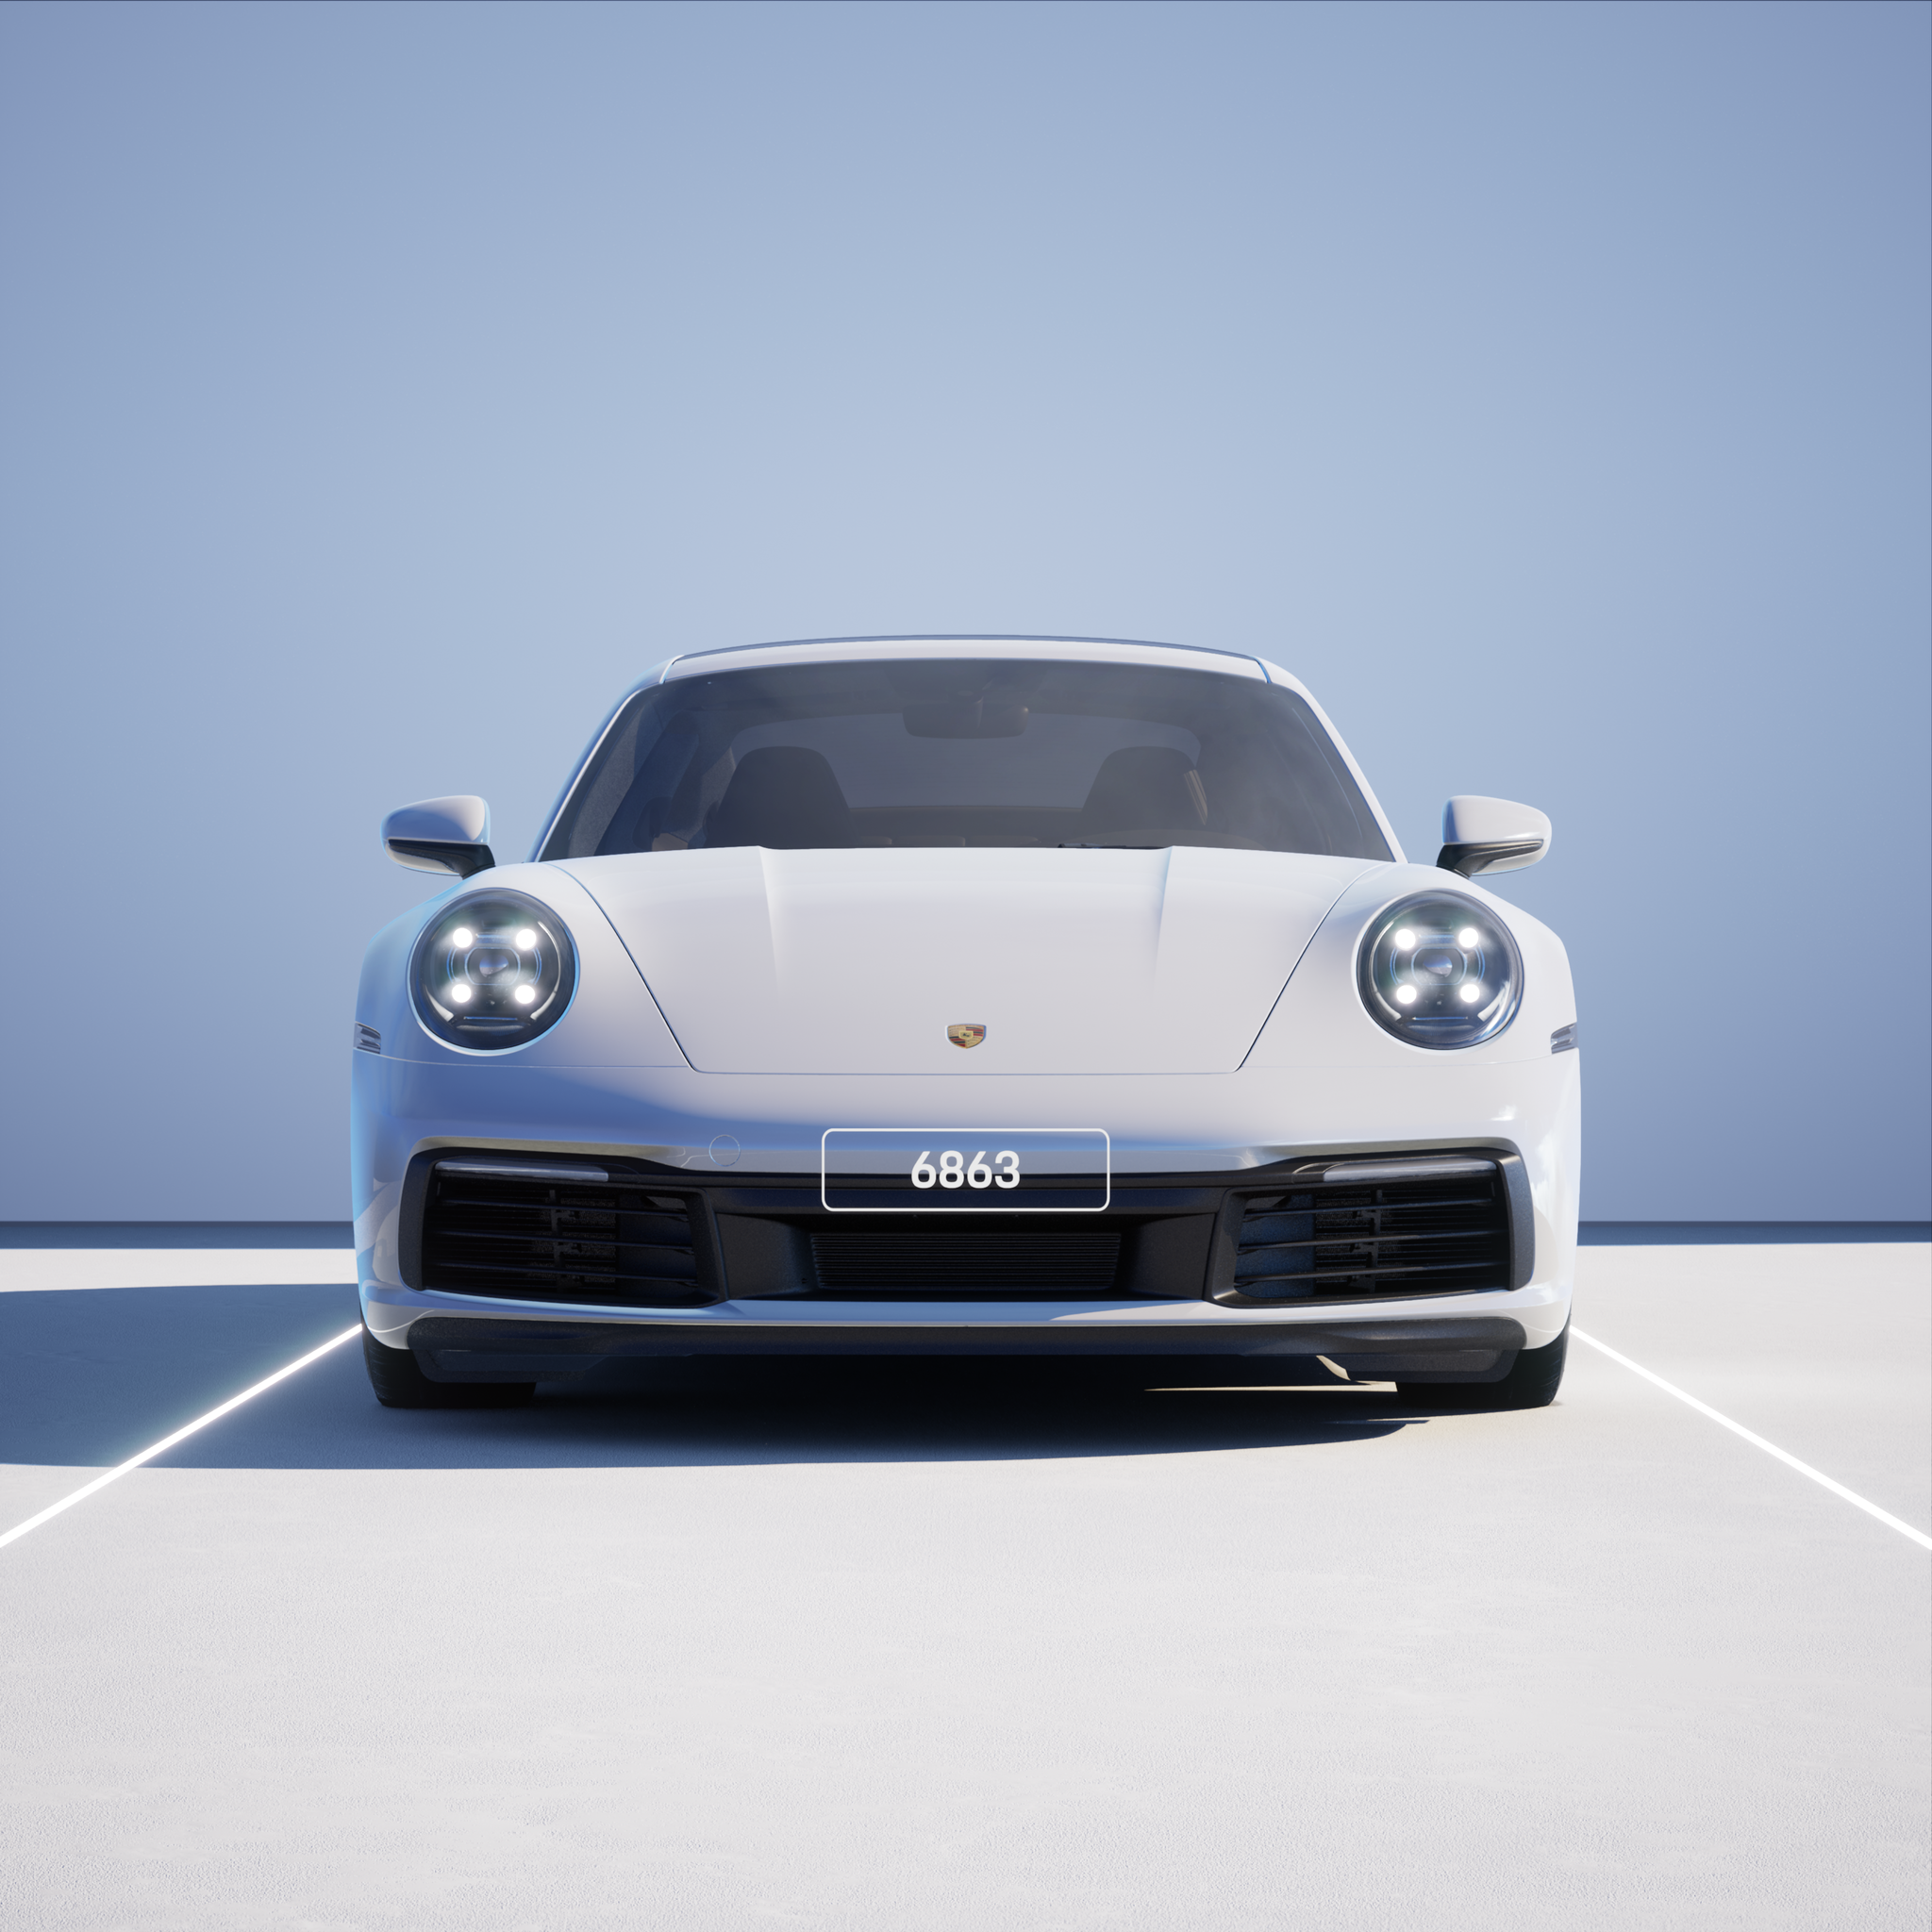 The PORSCHΞ 911 6863 image in phase